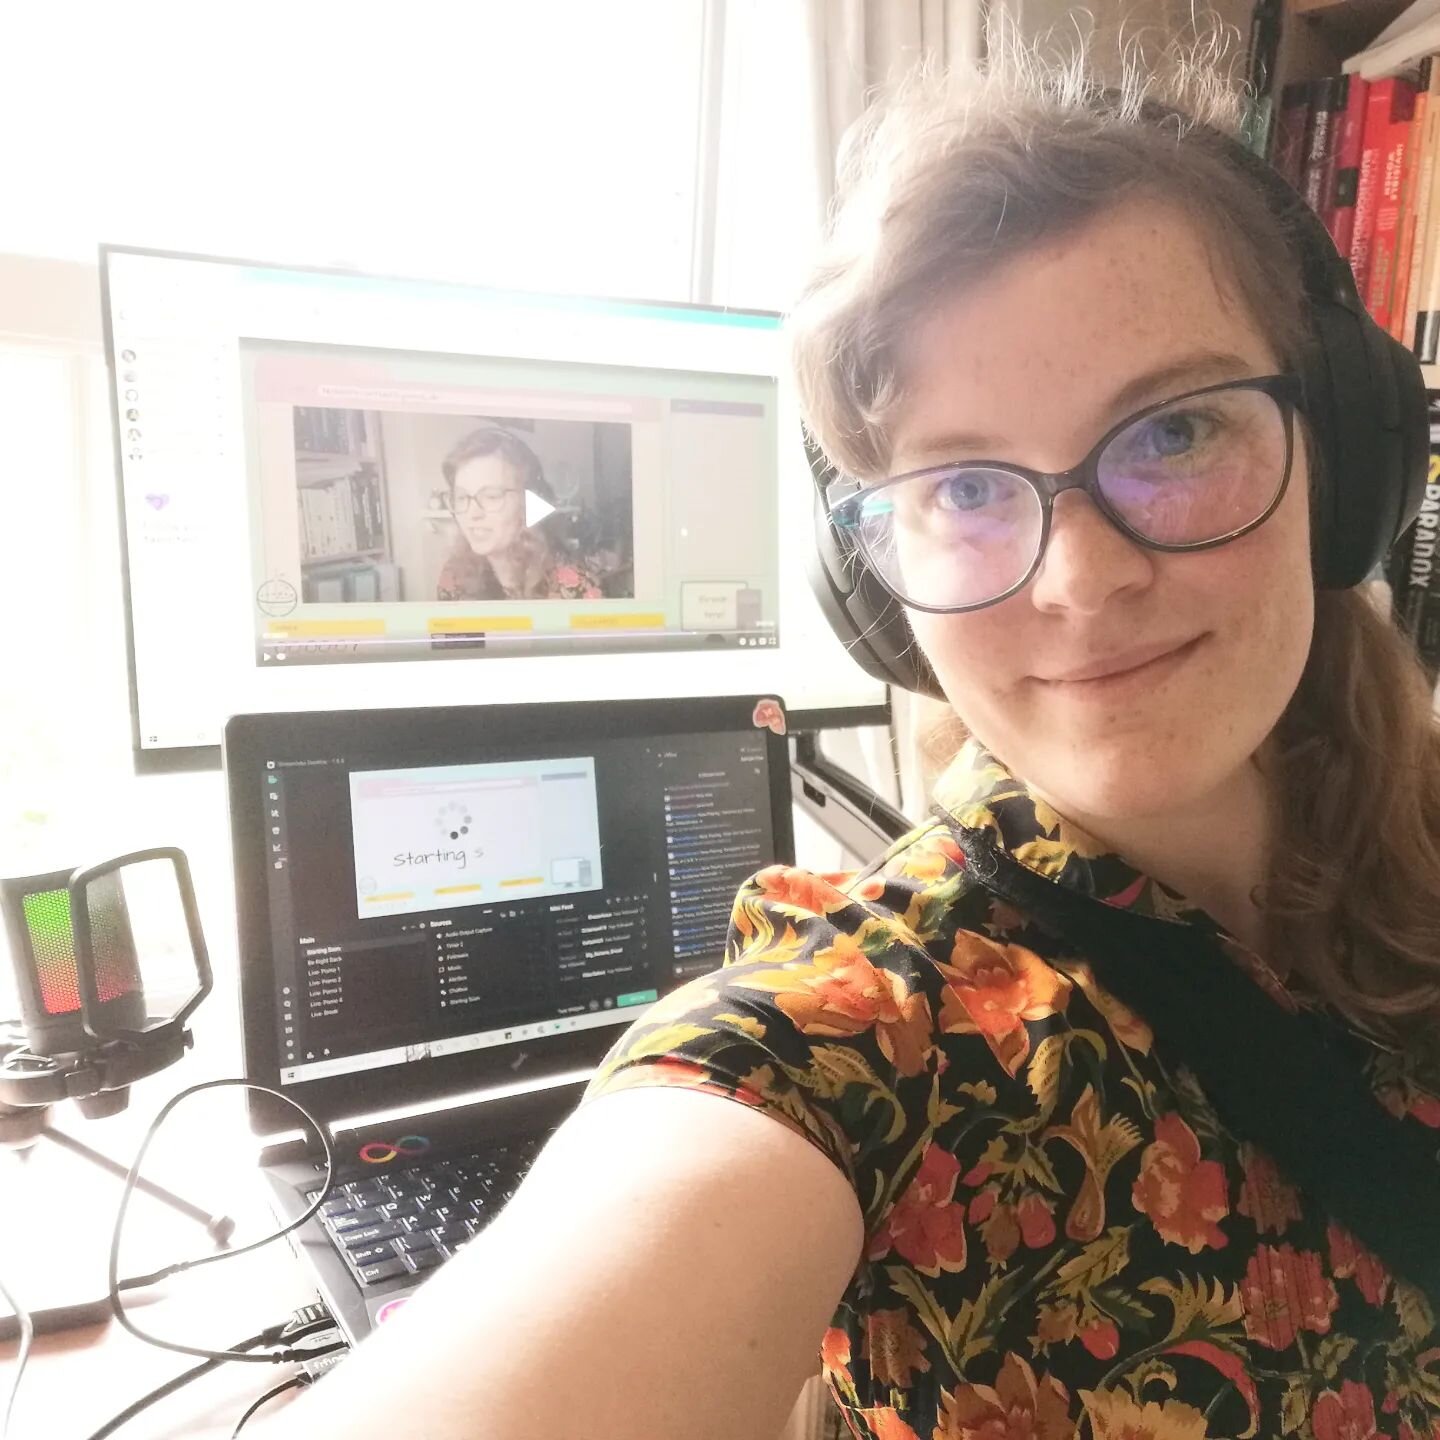 Achievement unlocked: First Stream 🎉

This morning I streamed for two hours 😊 I did 4 20min pomodoros with breaks and it was really nice to have some study buddies to keep me focused!!

I've scheduled streams on Mondays and Fridays 9-11 BST if anyo